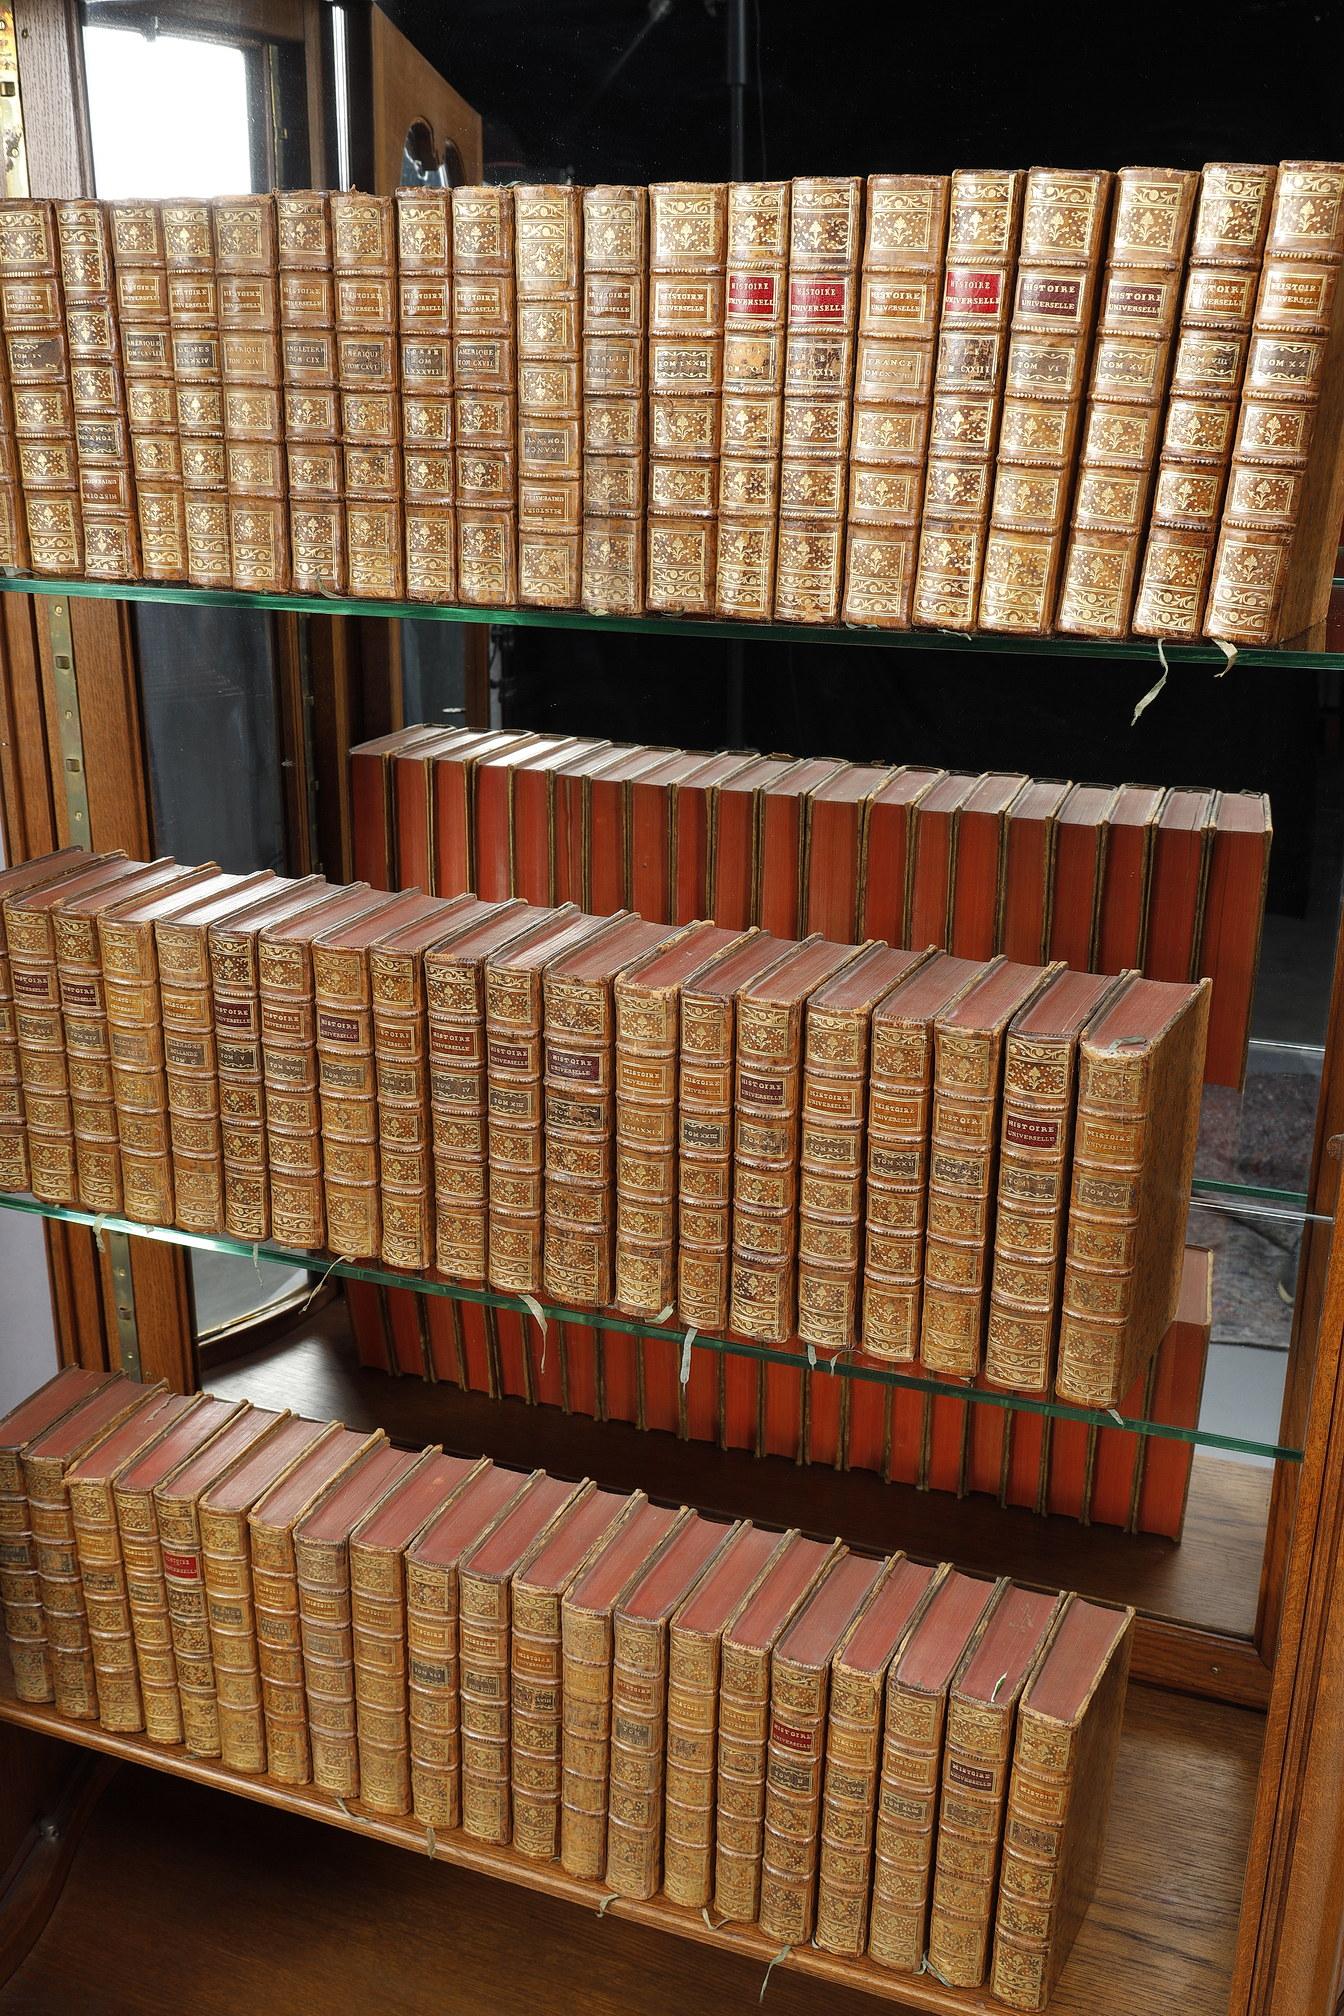 Late 18th Century Set of 125 books from the 18th-century